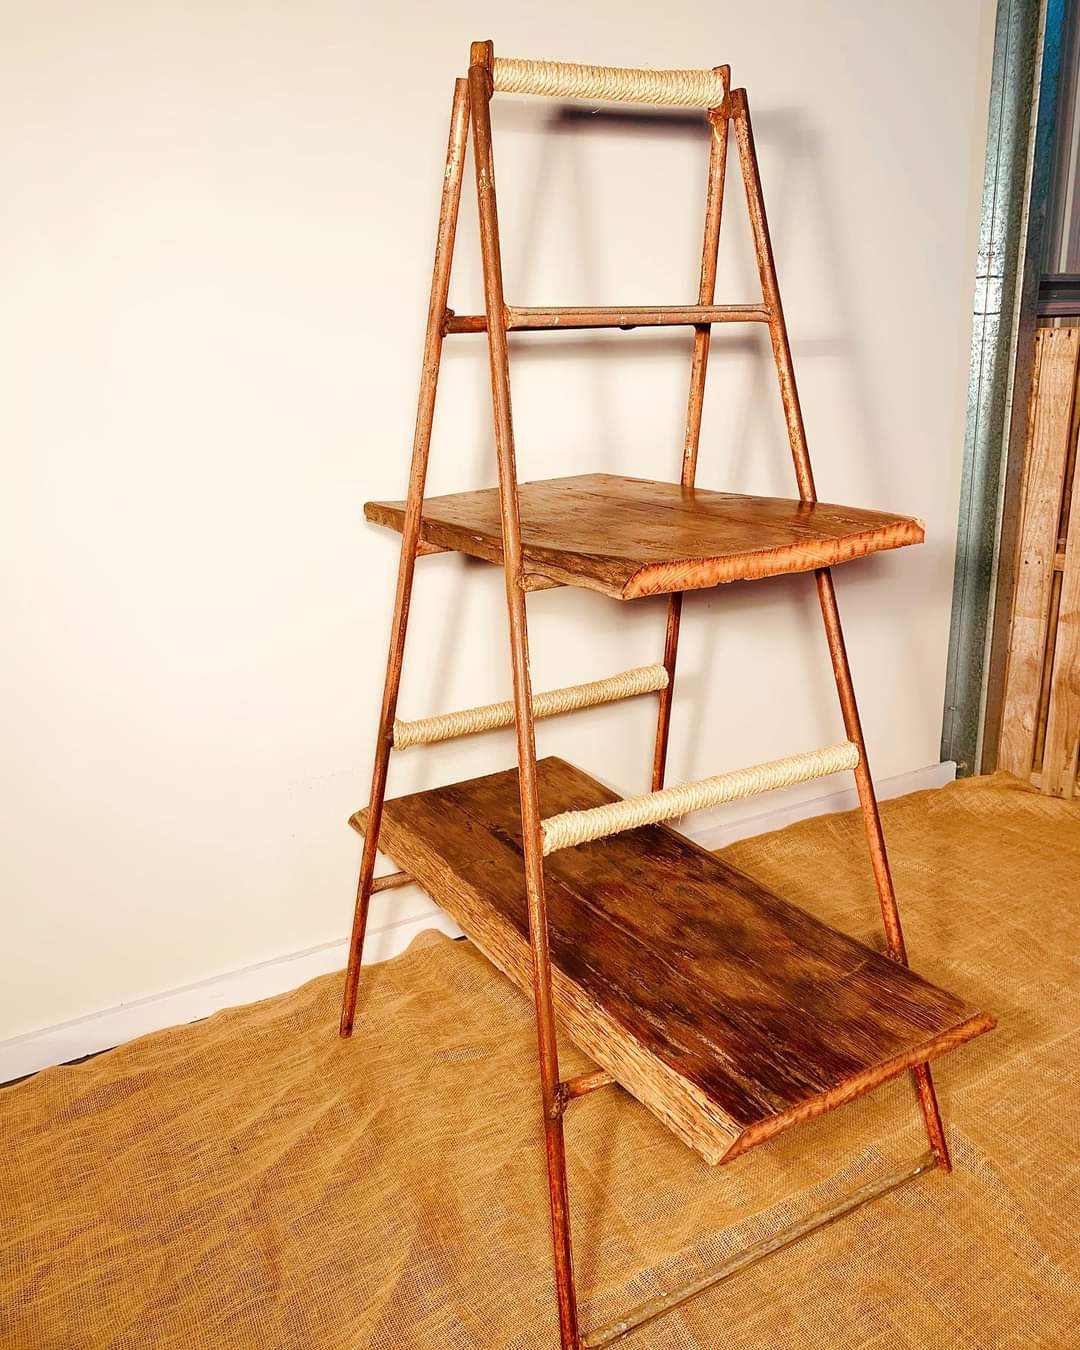 Reclaimed timber Shelving with vintage apple picking ladder.